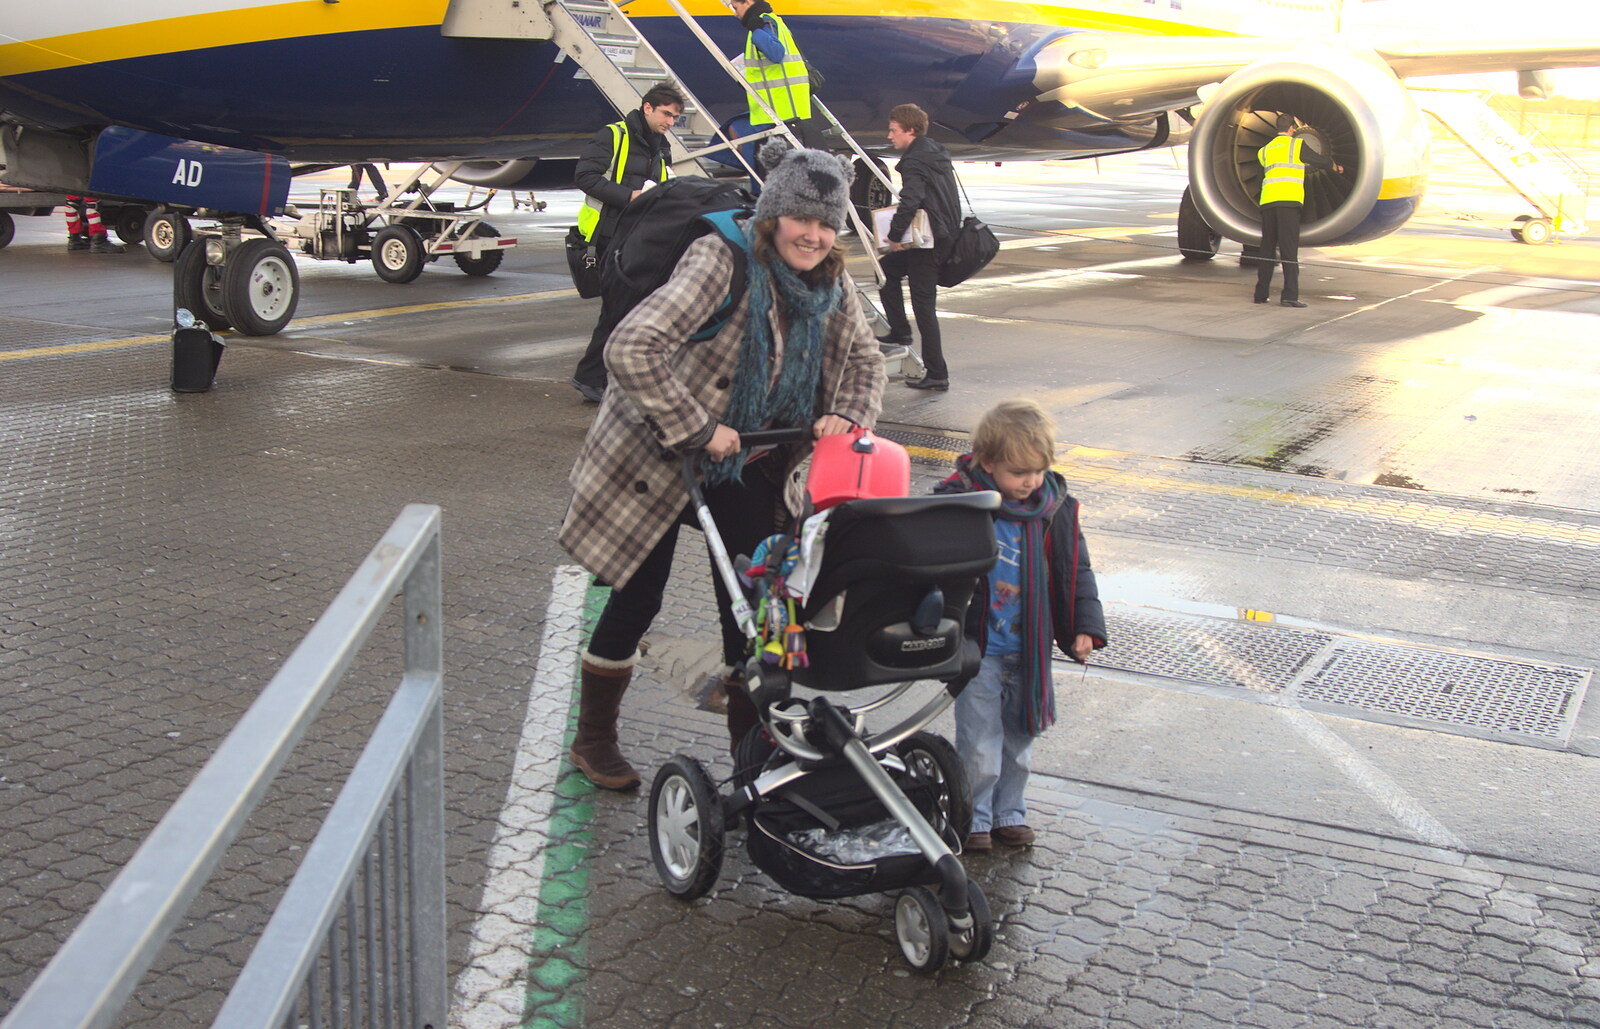 Isobel and The Boys exit the plane from A Pre-Christmas Dinner, Monkstown, Dublin - 16th December 2012